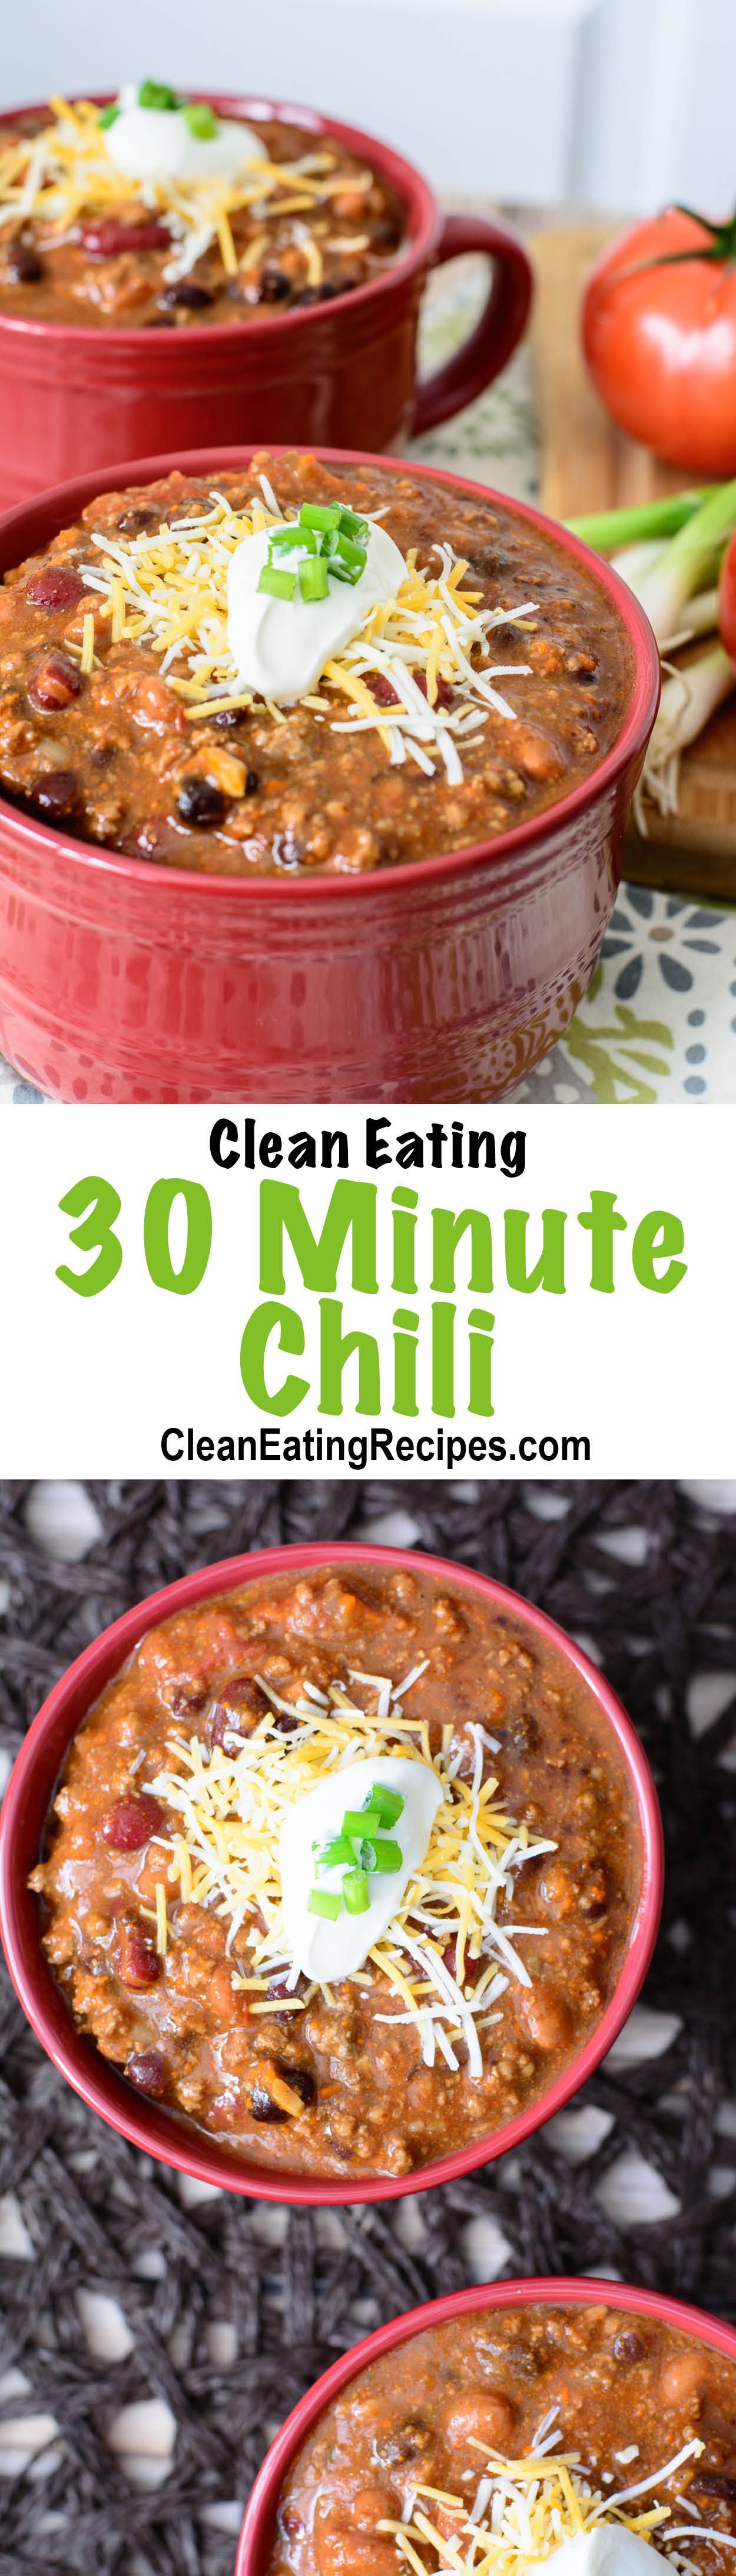 Super-Quick Clean Eating 30 Minute Chili Recipe – I love how easy it is to throw this together. You literally just dump in a bunch